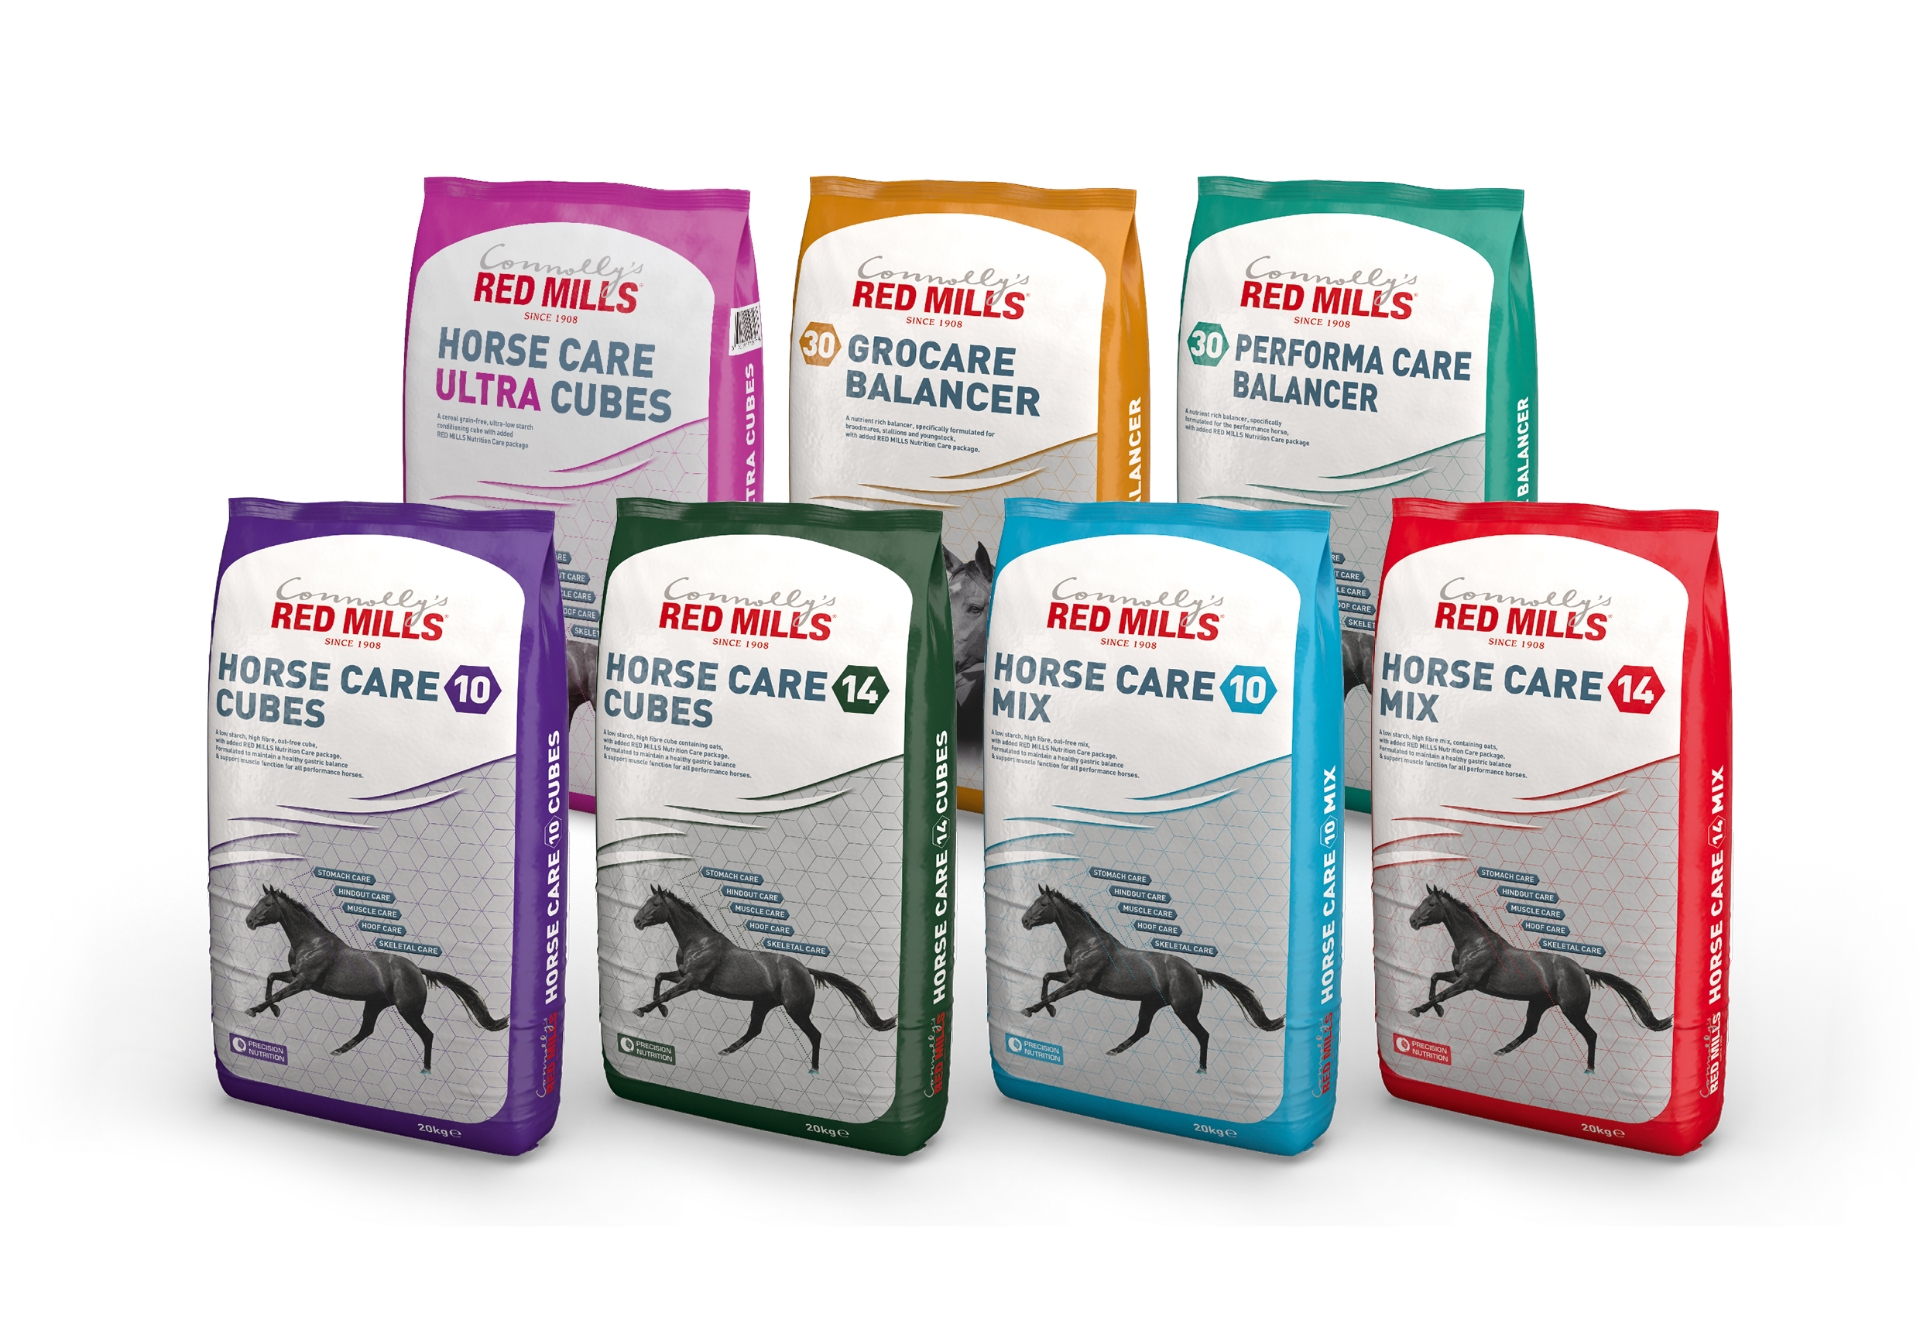 The RED MILLS Care Range